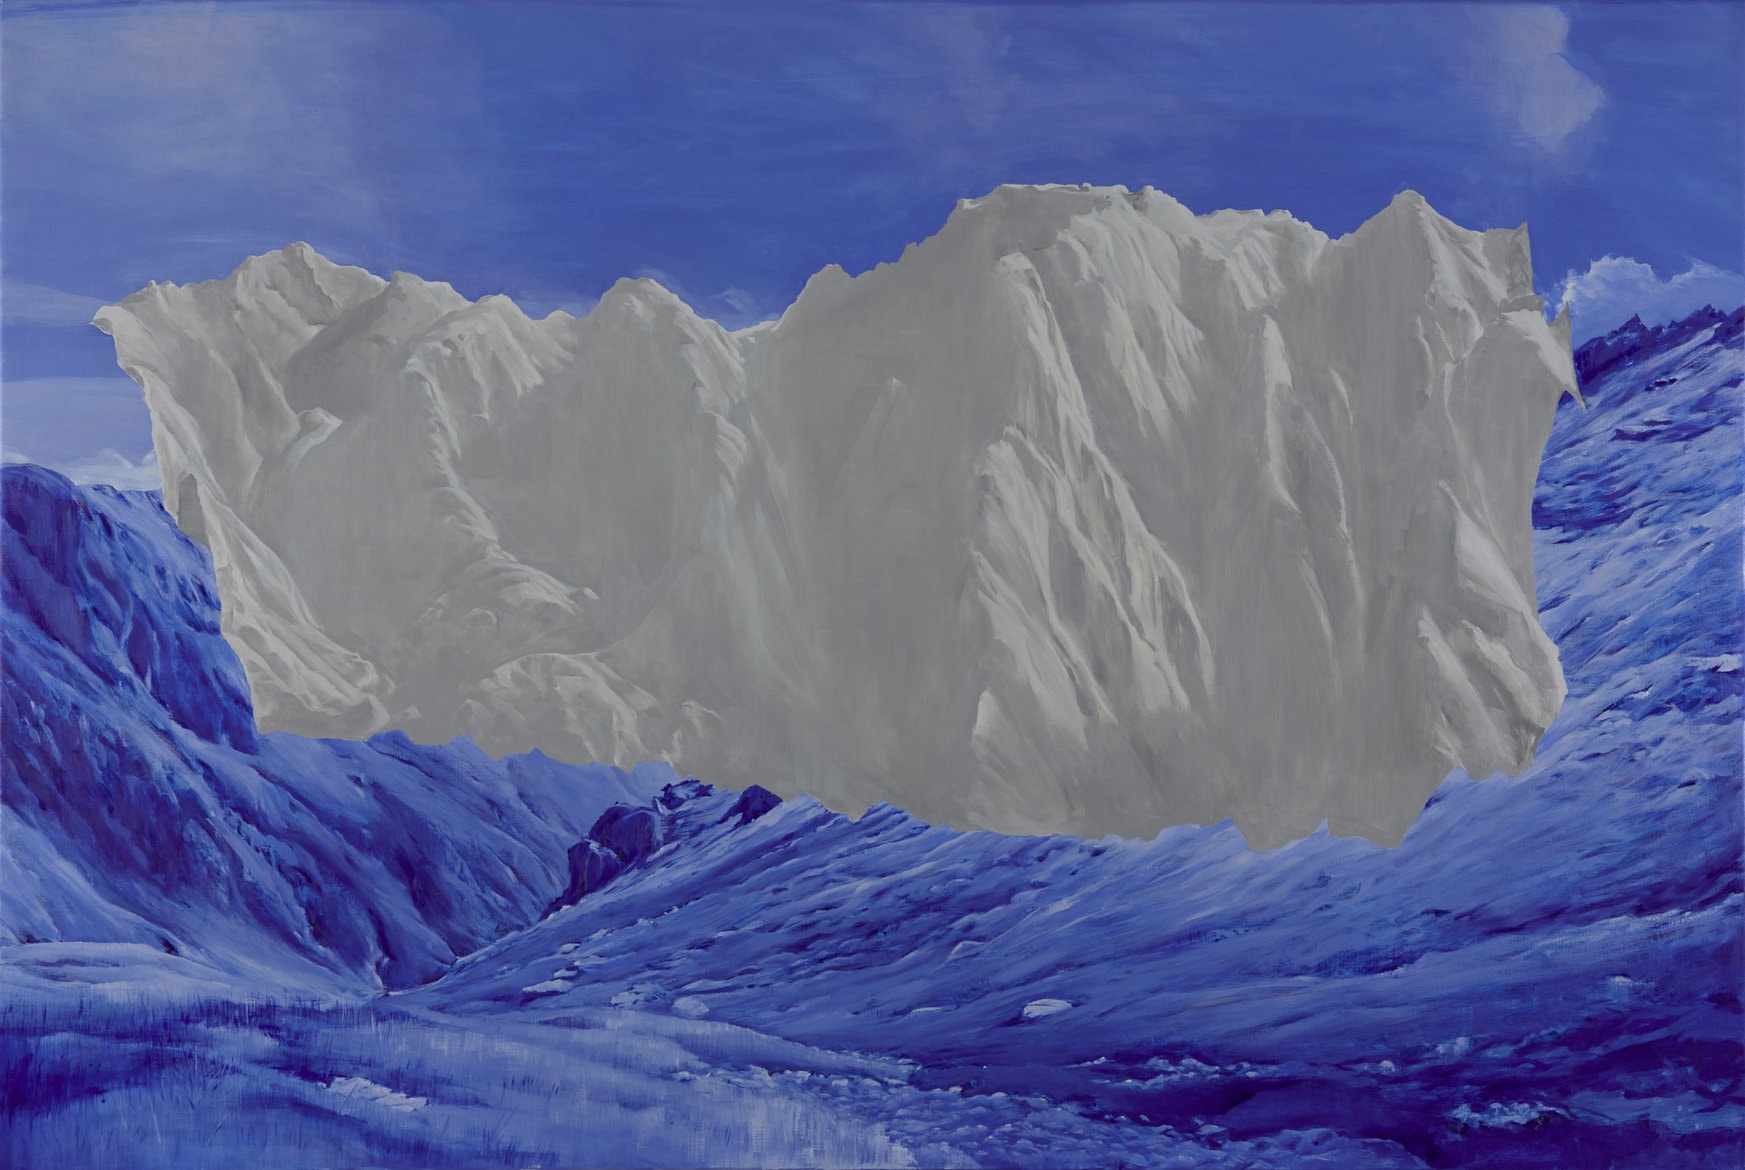 ‘It’s mountains all the way down’, 2022, oil on linen, 182 x 122 cm